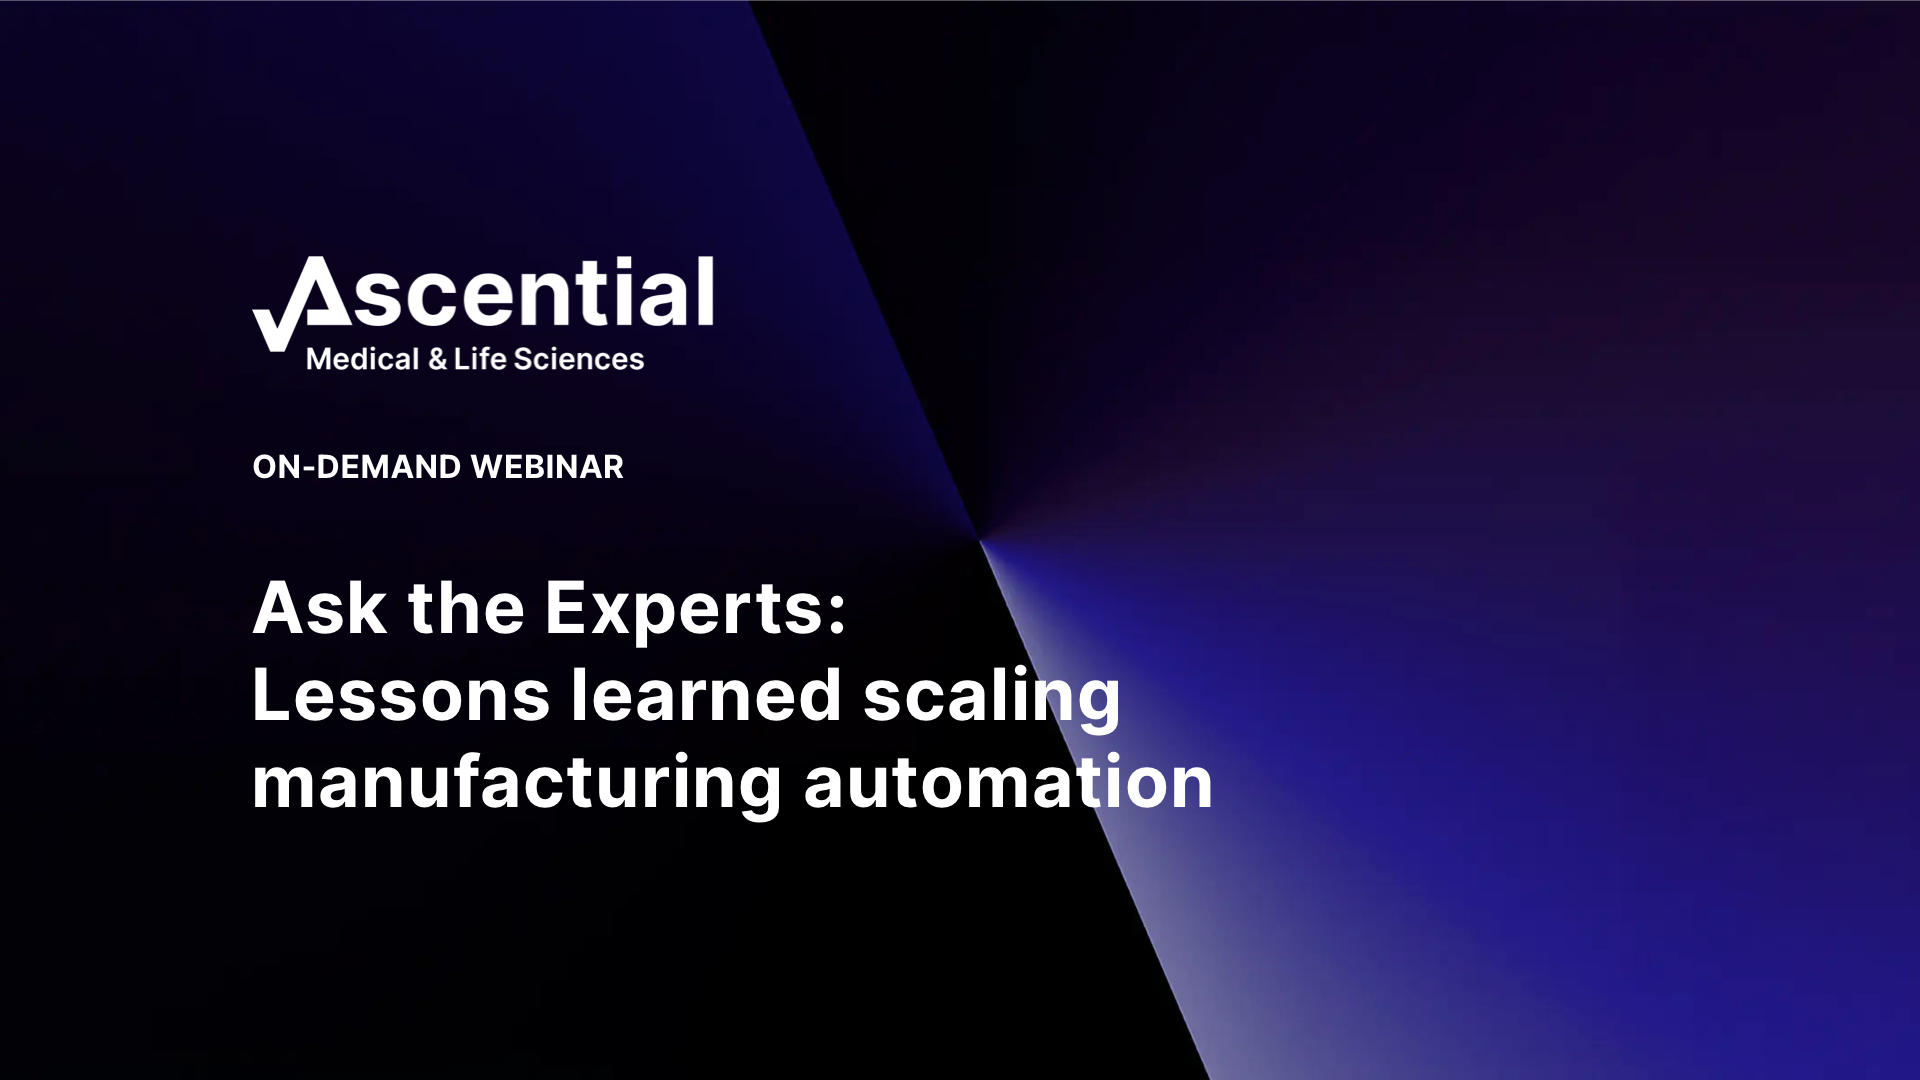 Ask the Experts: Lessons learned scaling manufacturing automation